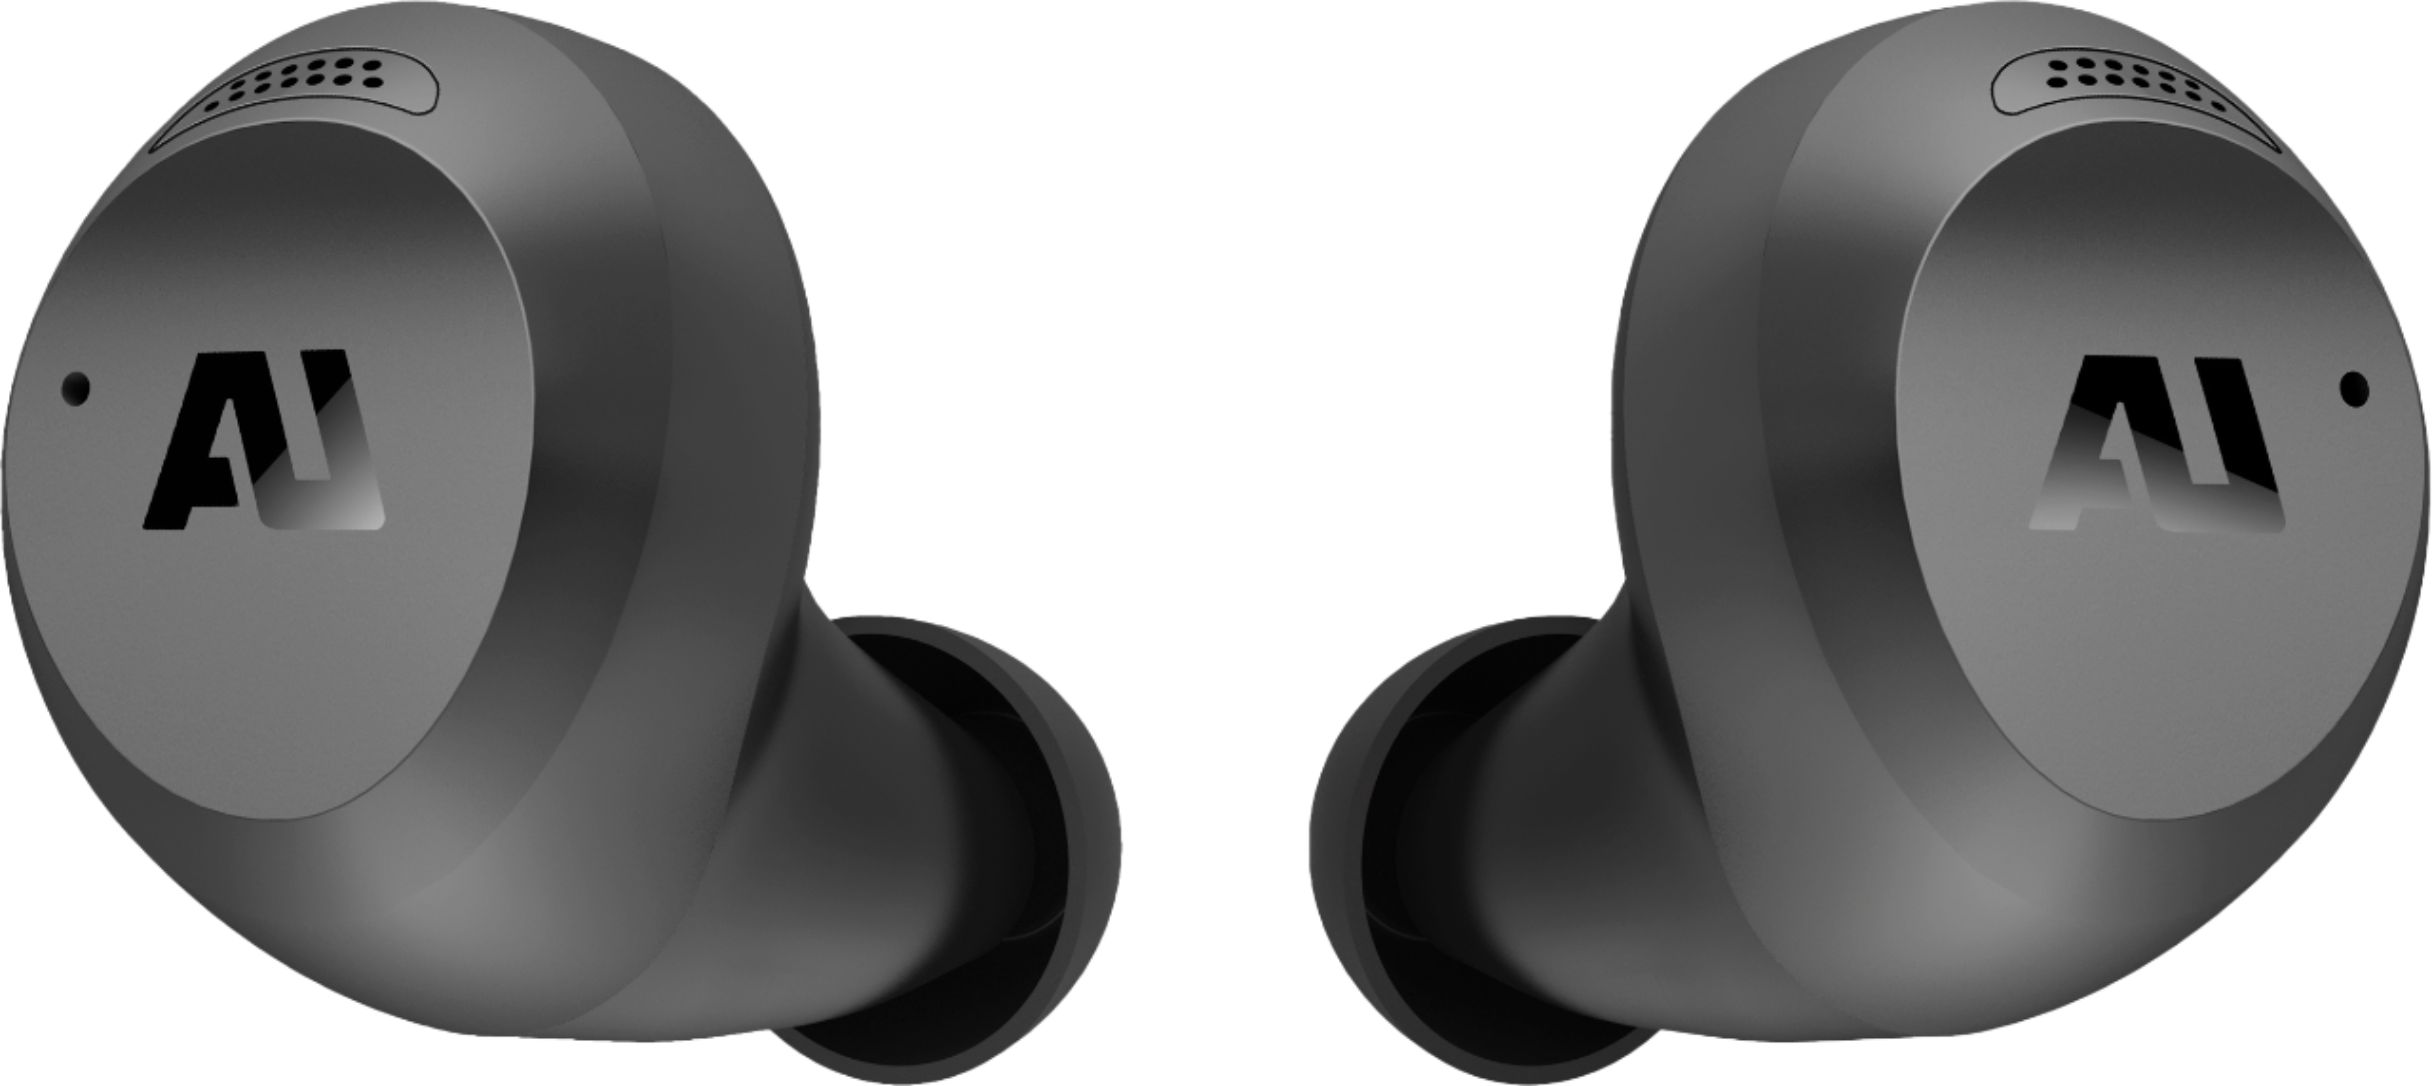 Angle View: Ausounds - AU Stream Hybrid True Wireless Noise Cancelling Earbuds - Gray